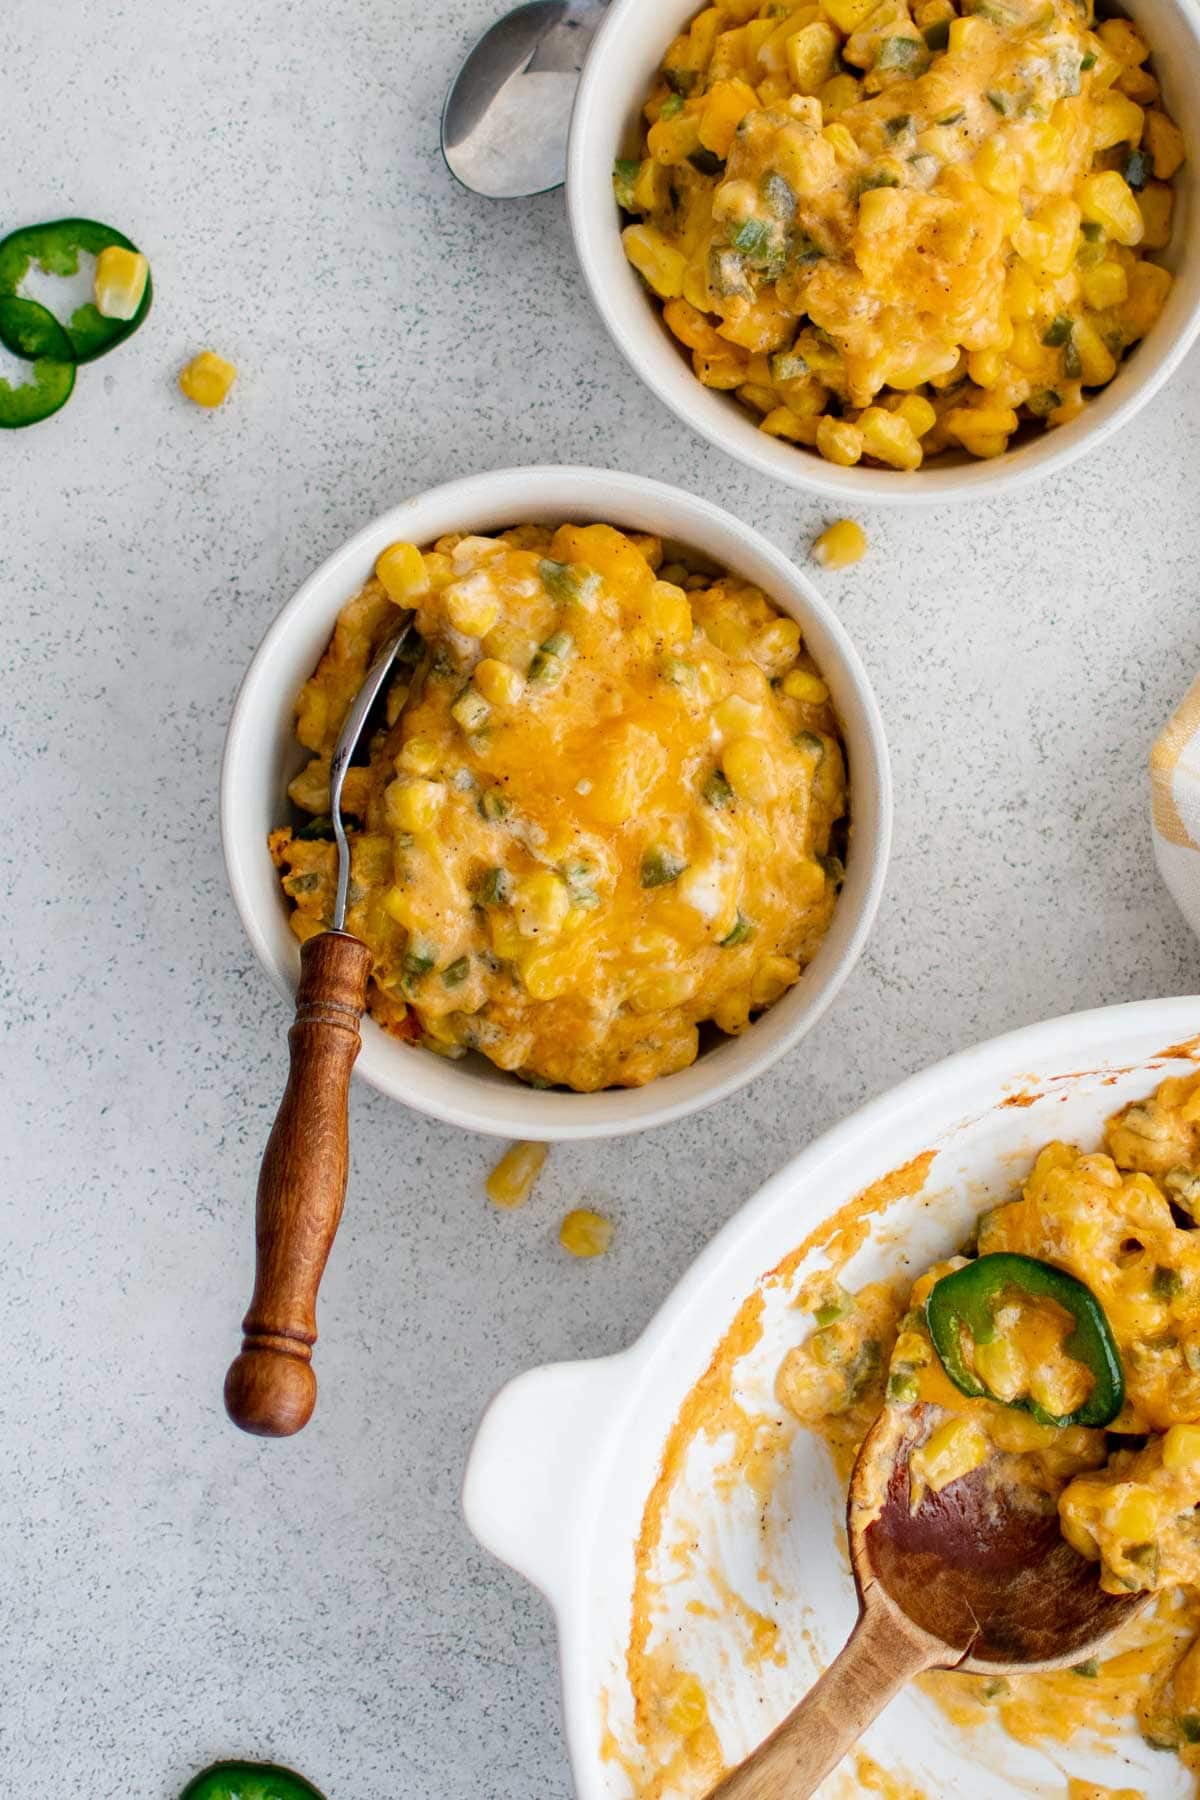 corn jalapeno casserole serving in a small bowl iwth a fork.